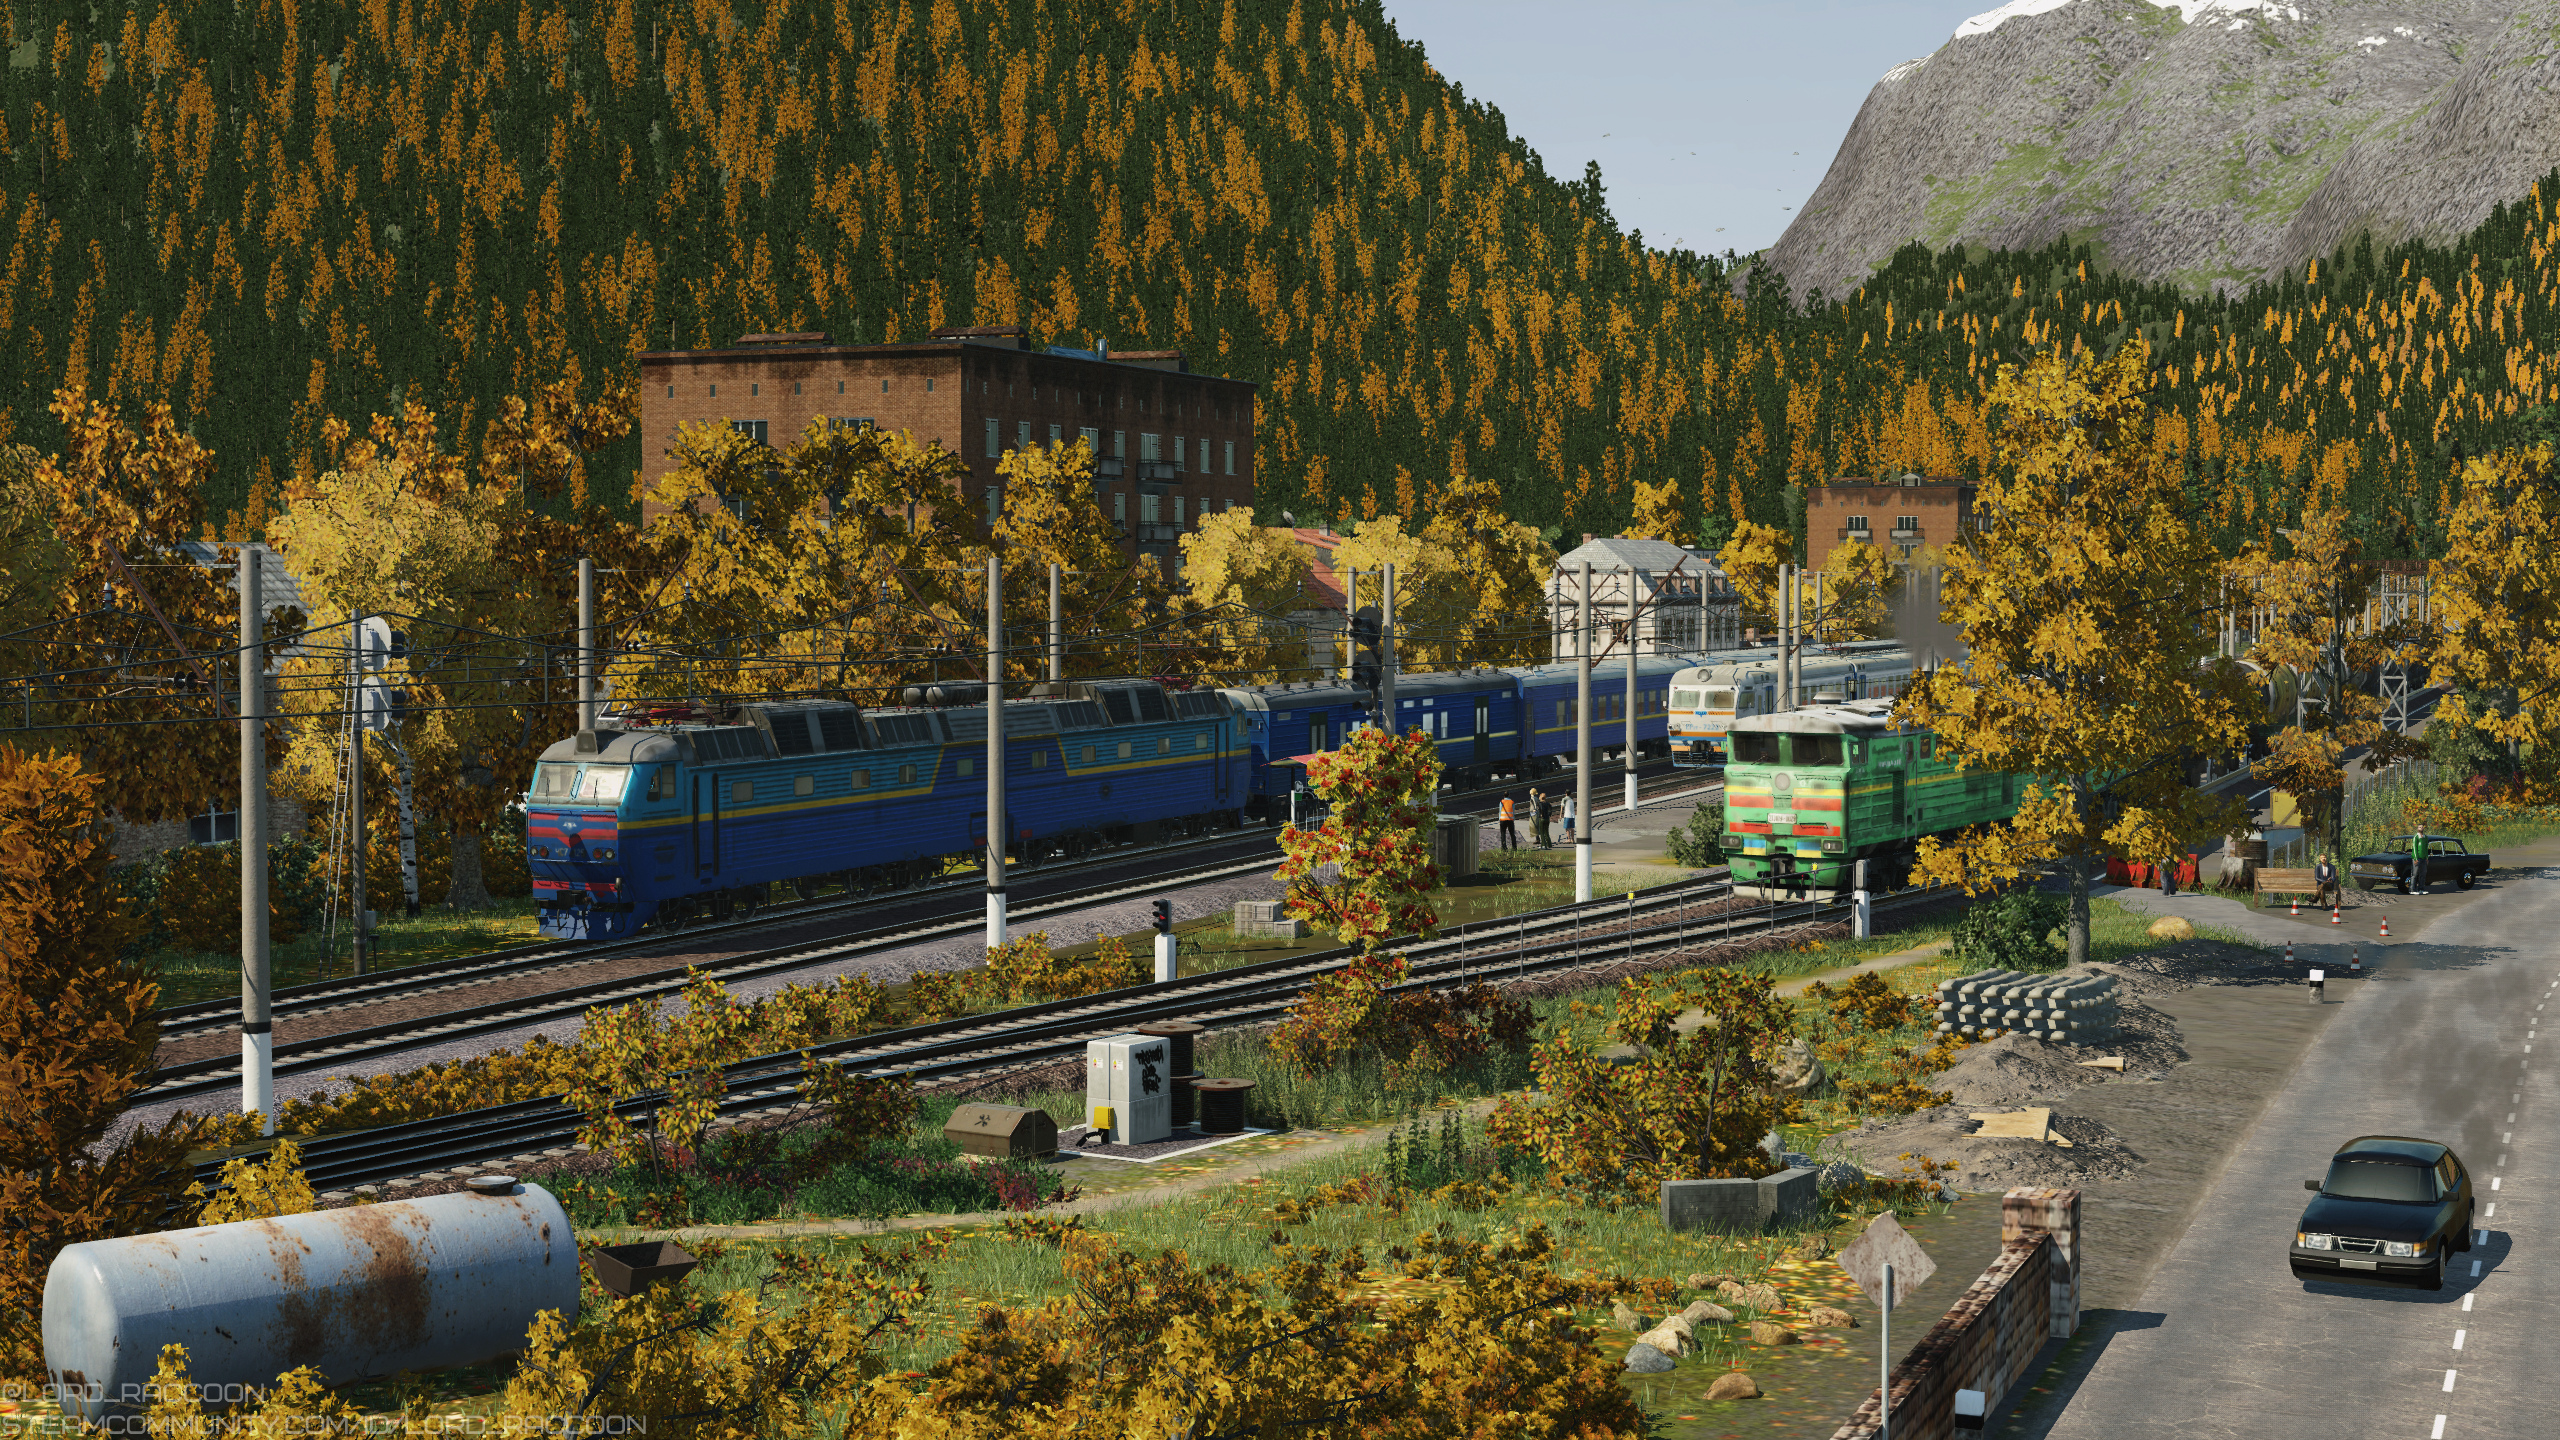 [TpF1] Small station at south-western Ukraine